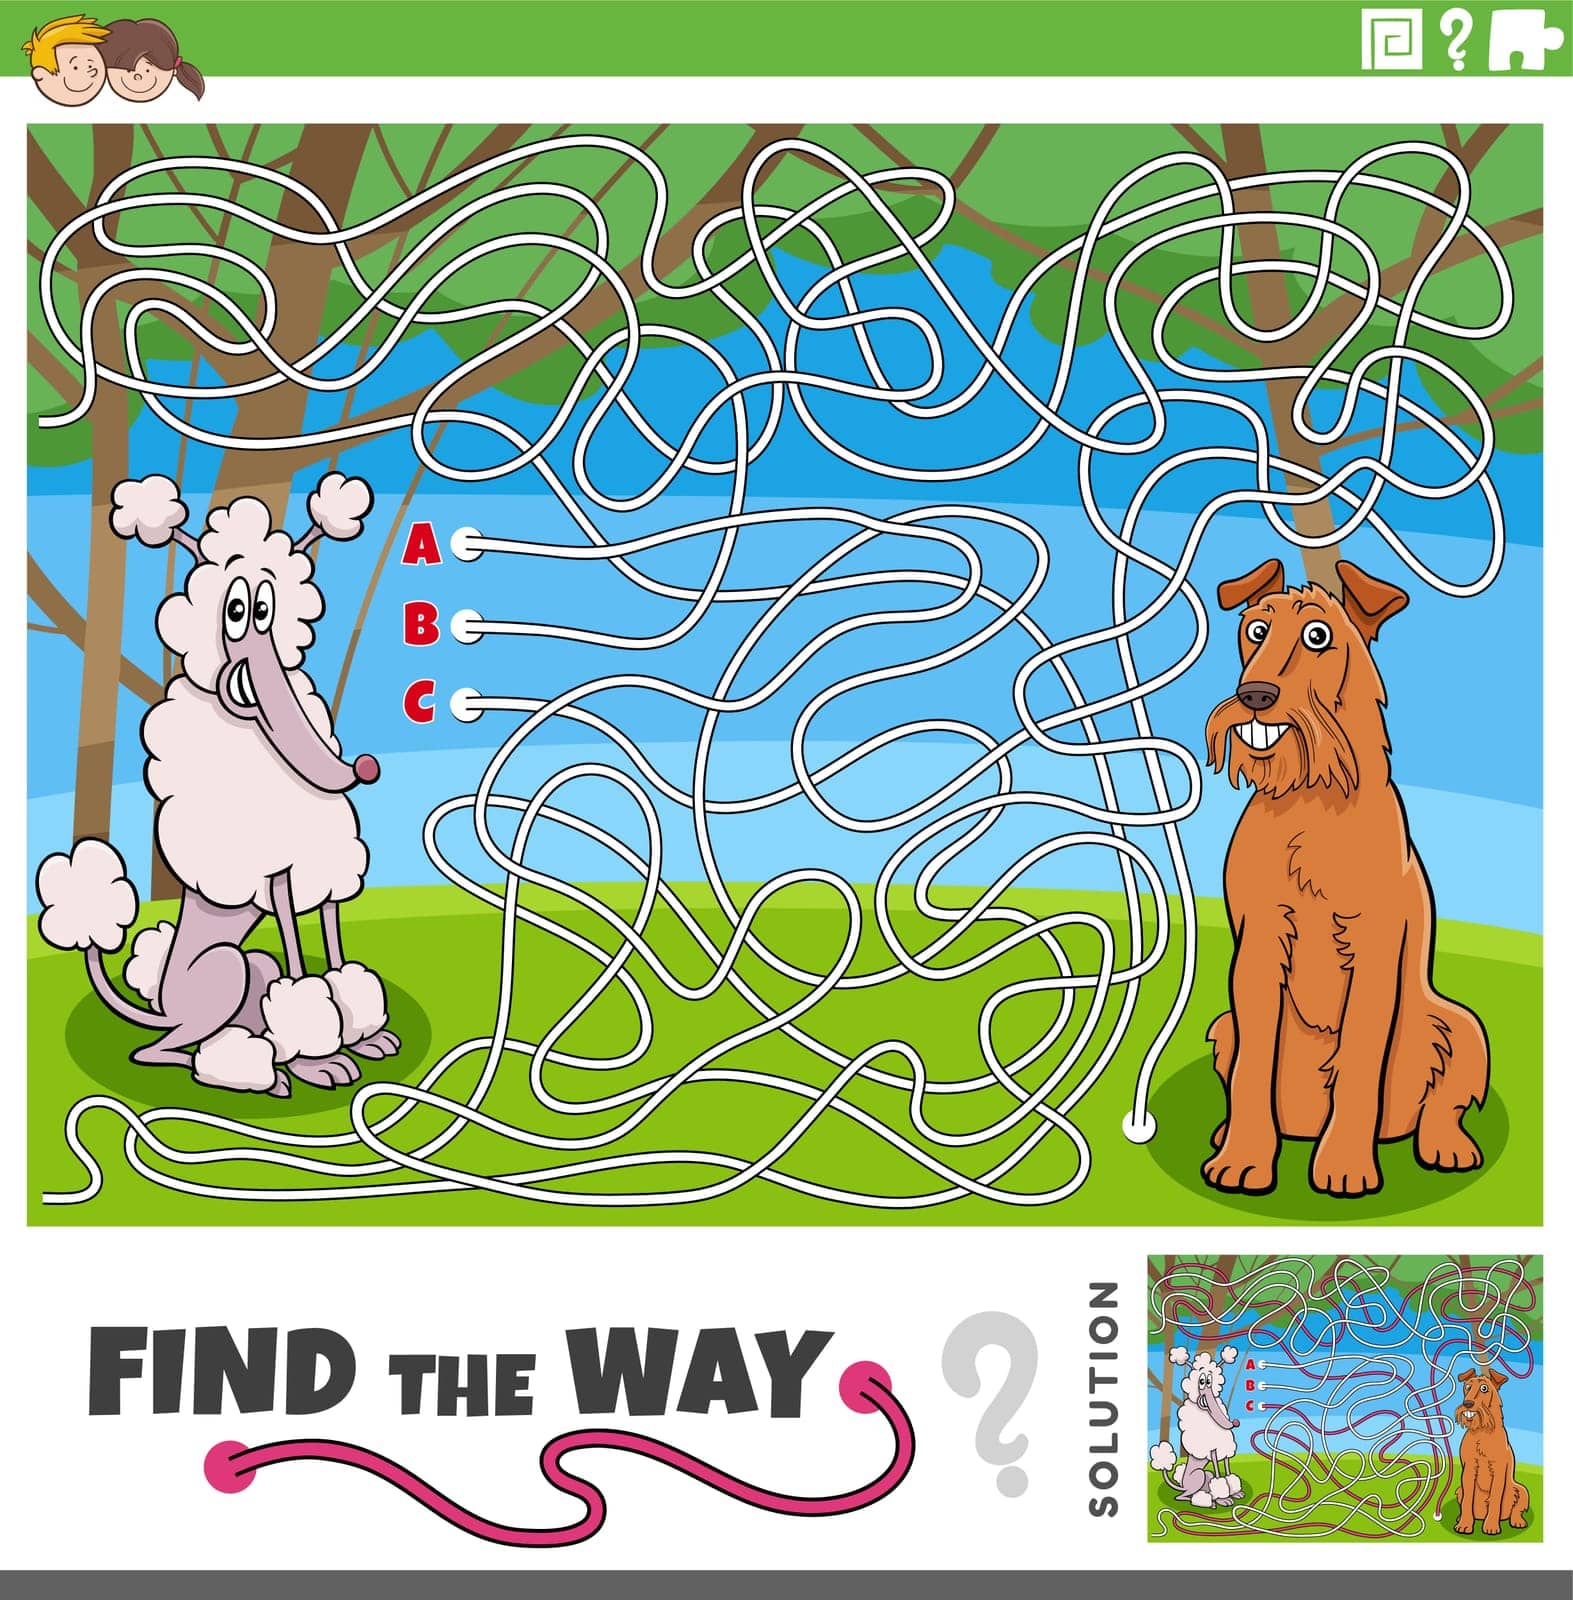 Cartoon illustration of find the way maze puzzle activity with funny purebred dogs animal characters